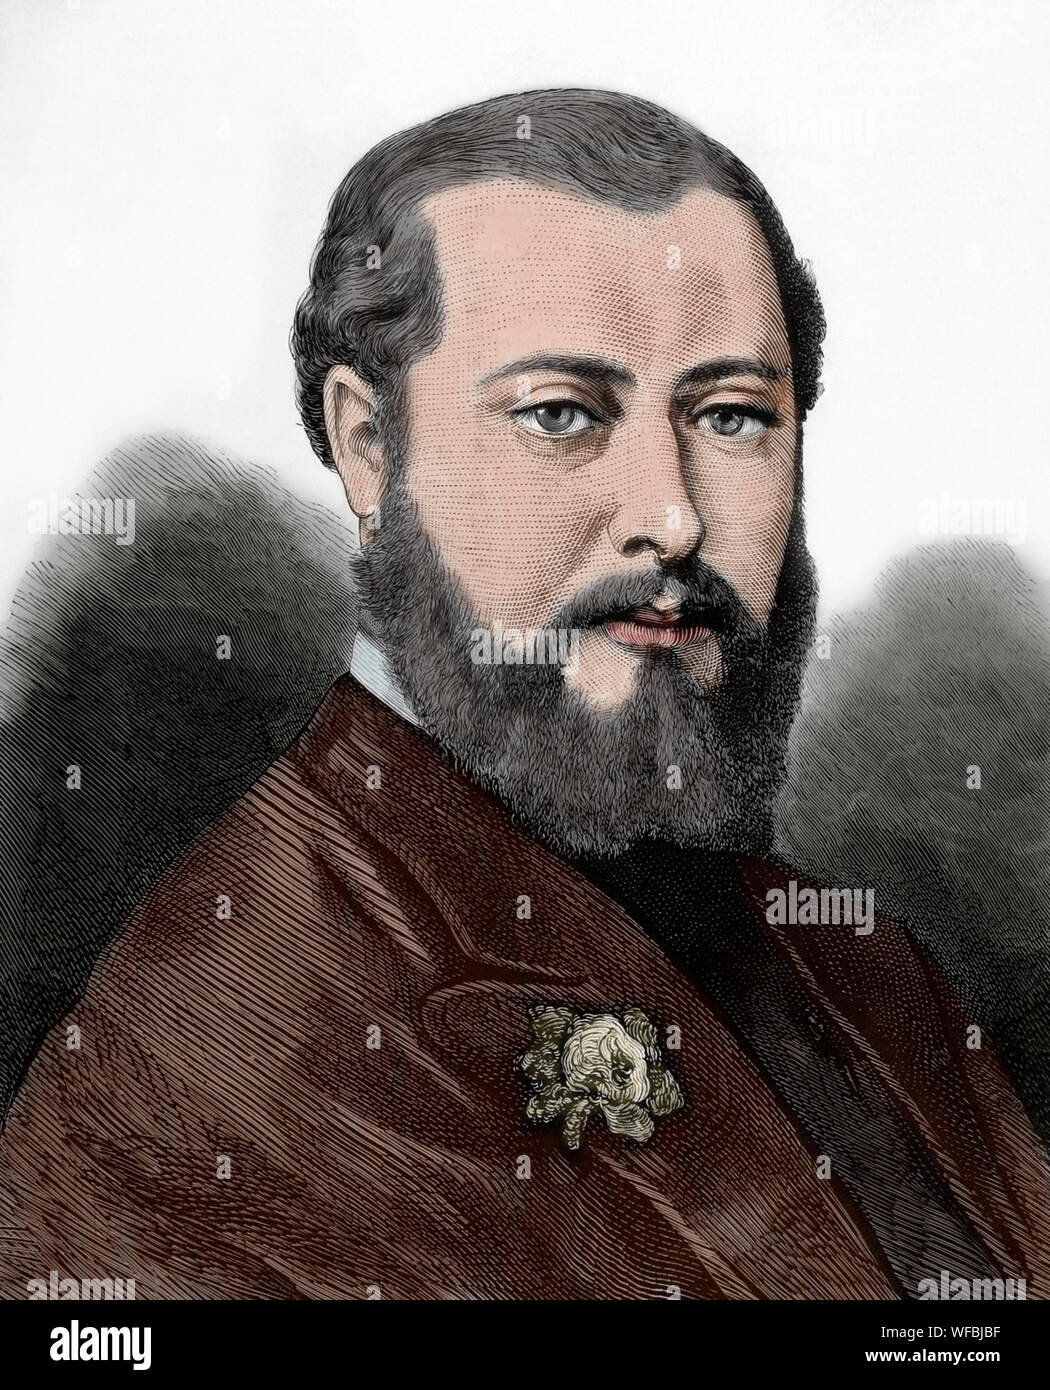 Edward VII (1841-1910). King of the United Kingdom of Great Britain and Ireland and of the British dominions and emperor of India from 1901. He was the eldest son of Queen Victoria. Portrait as The Prince Albert Edward, future Edward VII. Engraving. La Ilustracion Española y Americana, April 22, 1876. Later colouration. Stock Photo